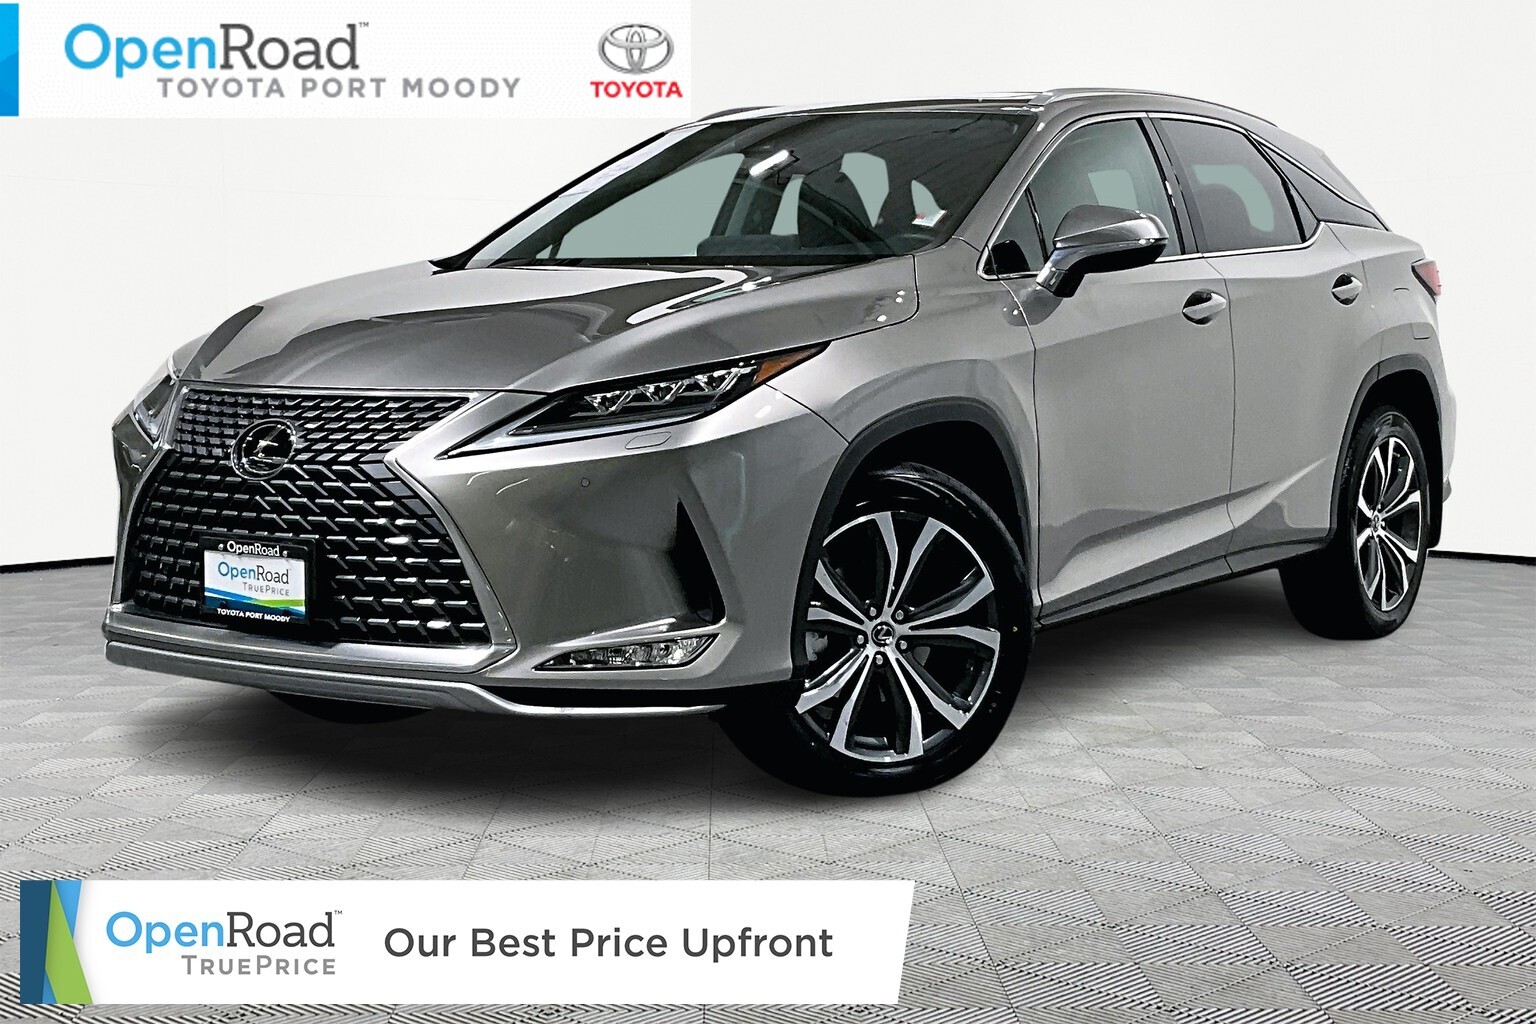 2021 Lexus RX 350 AWD |OpenRoad True Price |Local |One Owner |No